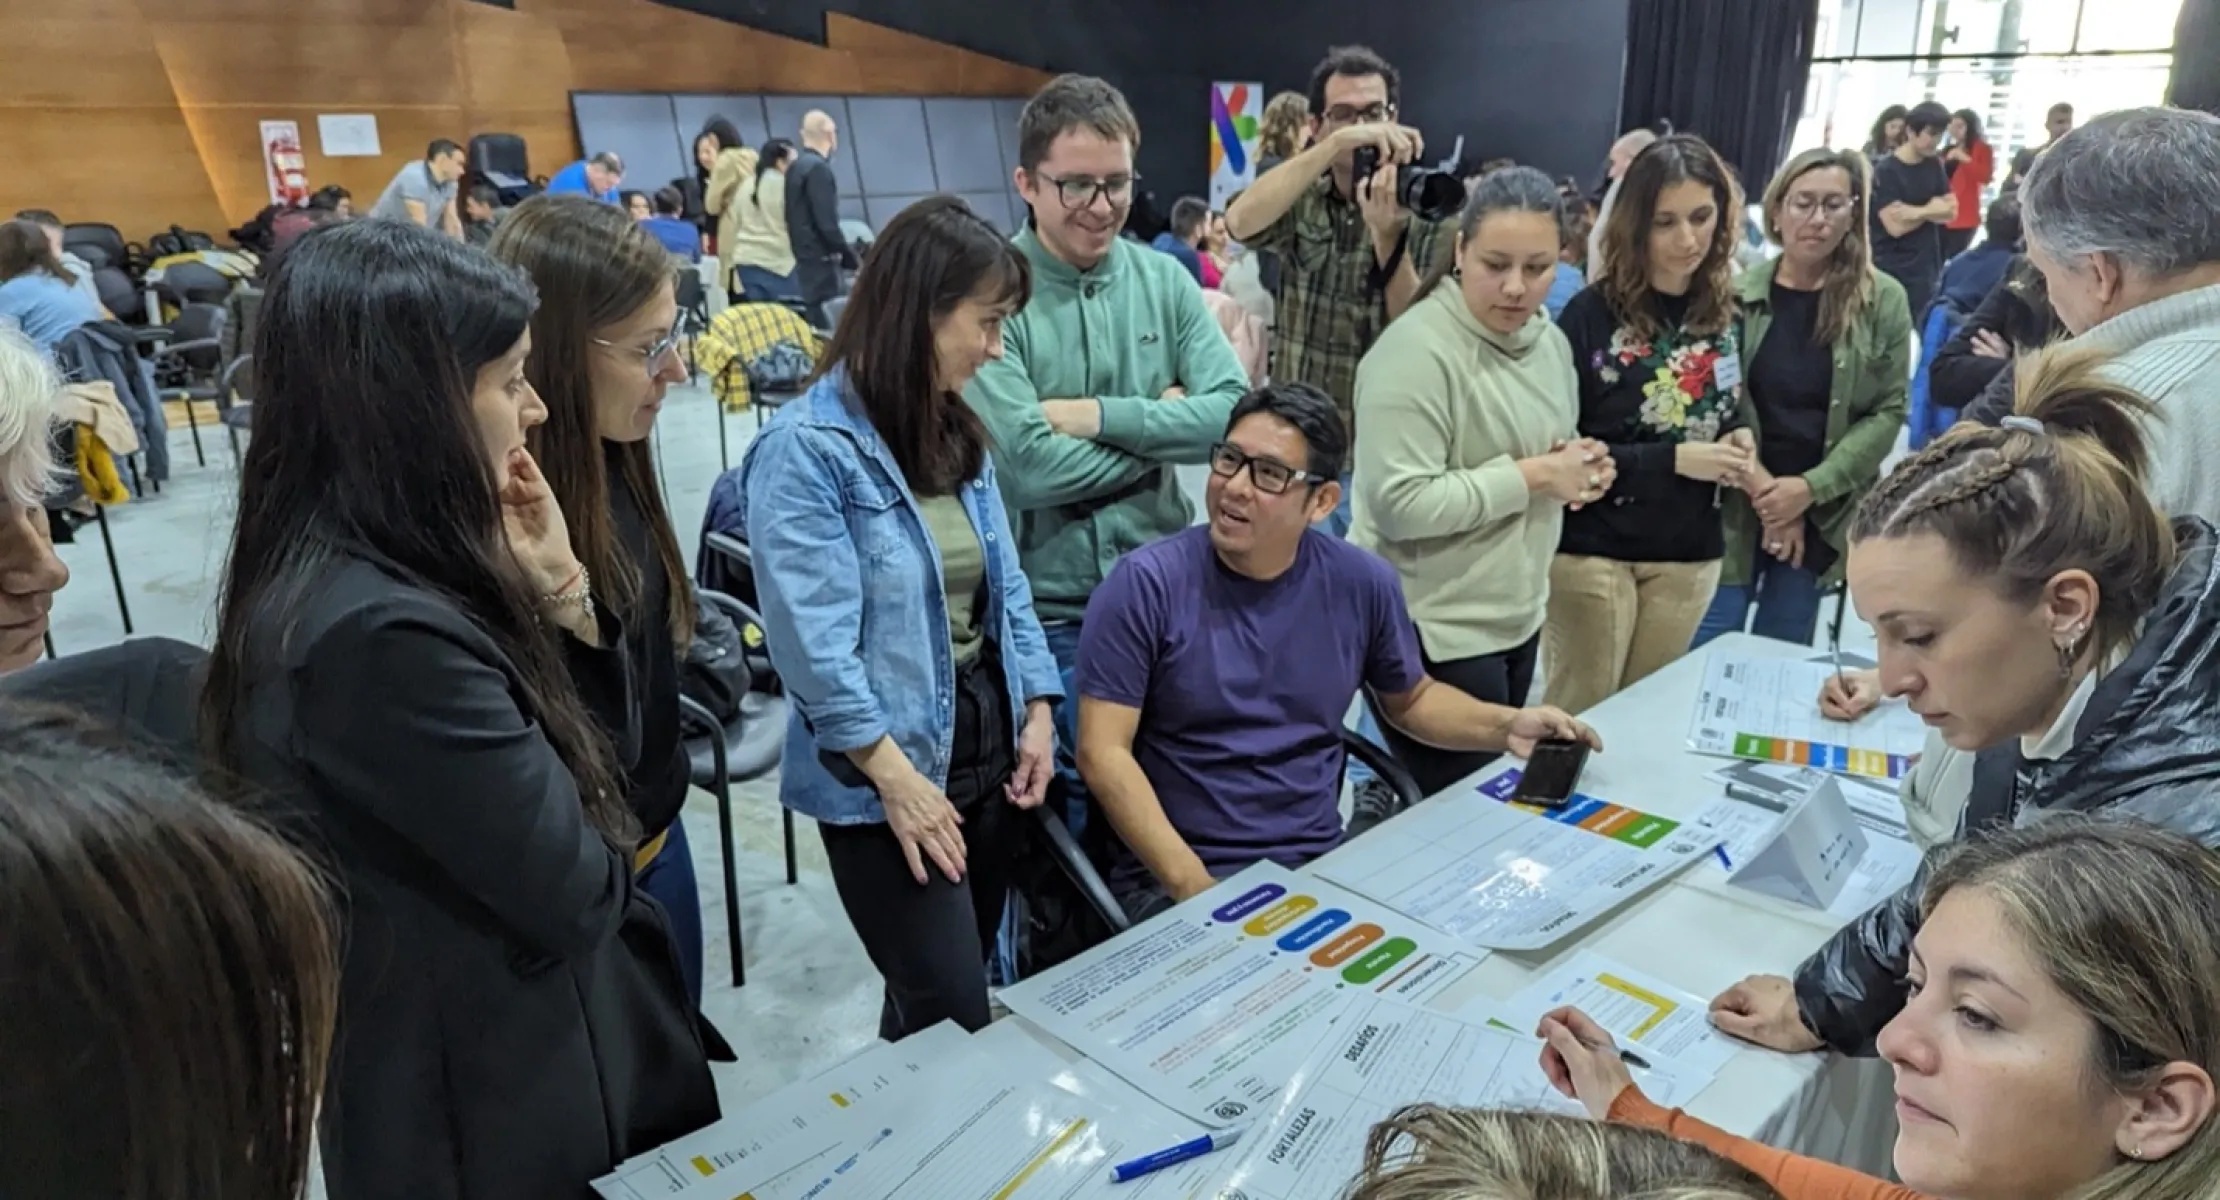  Our City Plans team delivered a series of trainings, events, and participatory workshops in the context of the Neuquén Sustainable Cities Programme. This is a collaboration between UN-Habitat and Consejo de Planificación y Acción para el Desarrollo (Copade) (Council of Planning and Action for Development) of Neuquén.